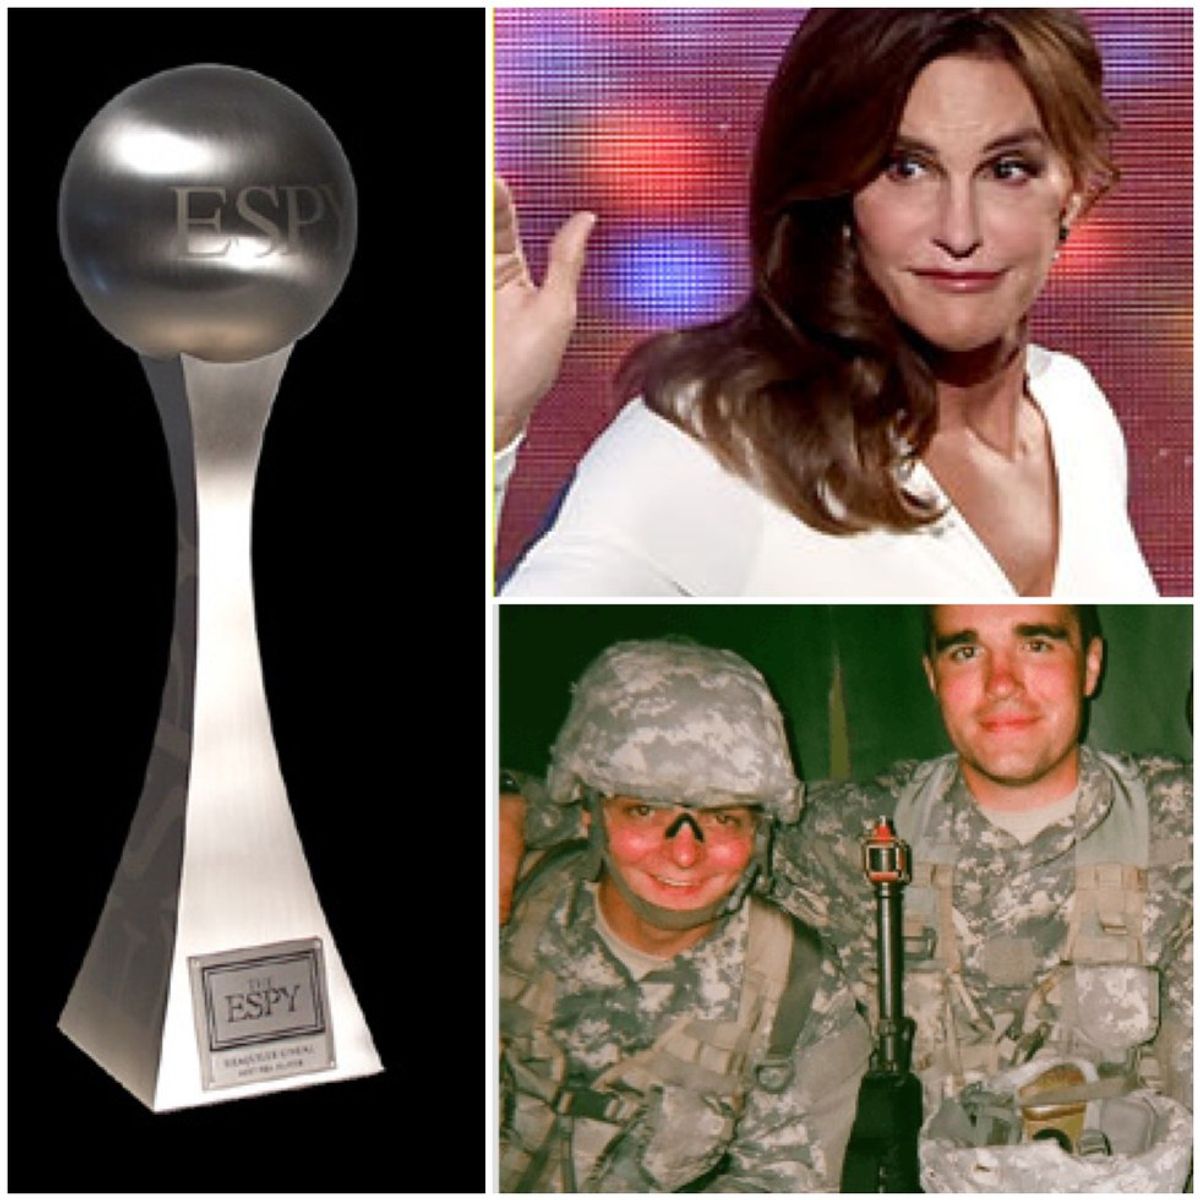 Editor's Note: Caitlyn Jenner And The Definition Of A "Hero"